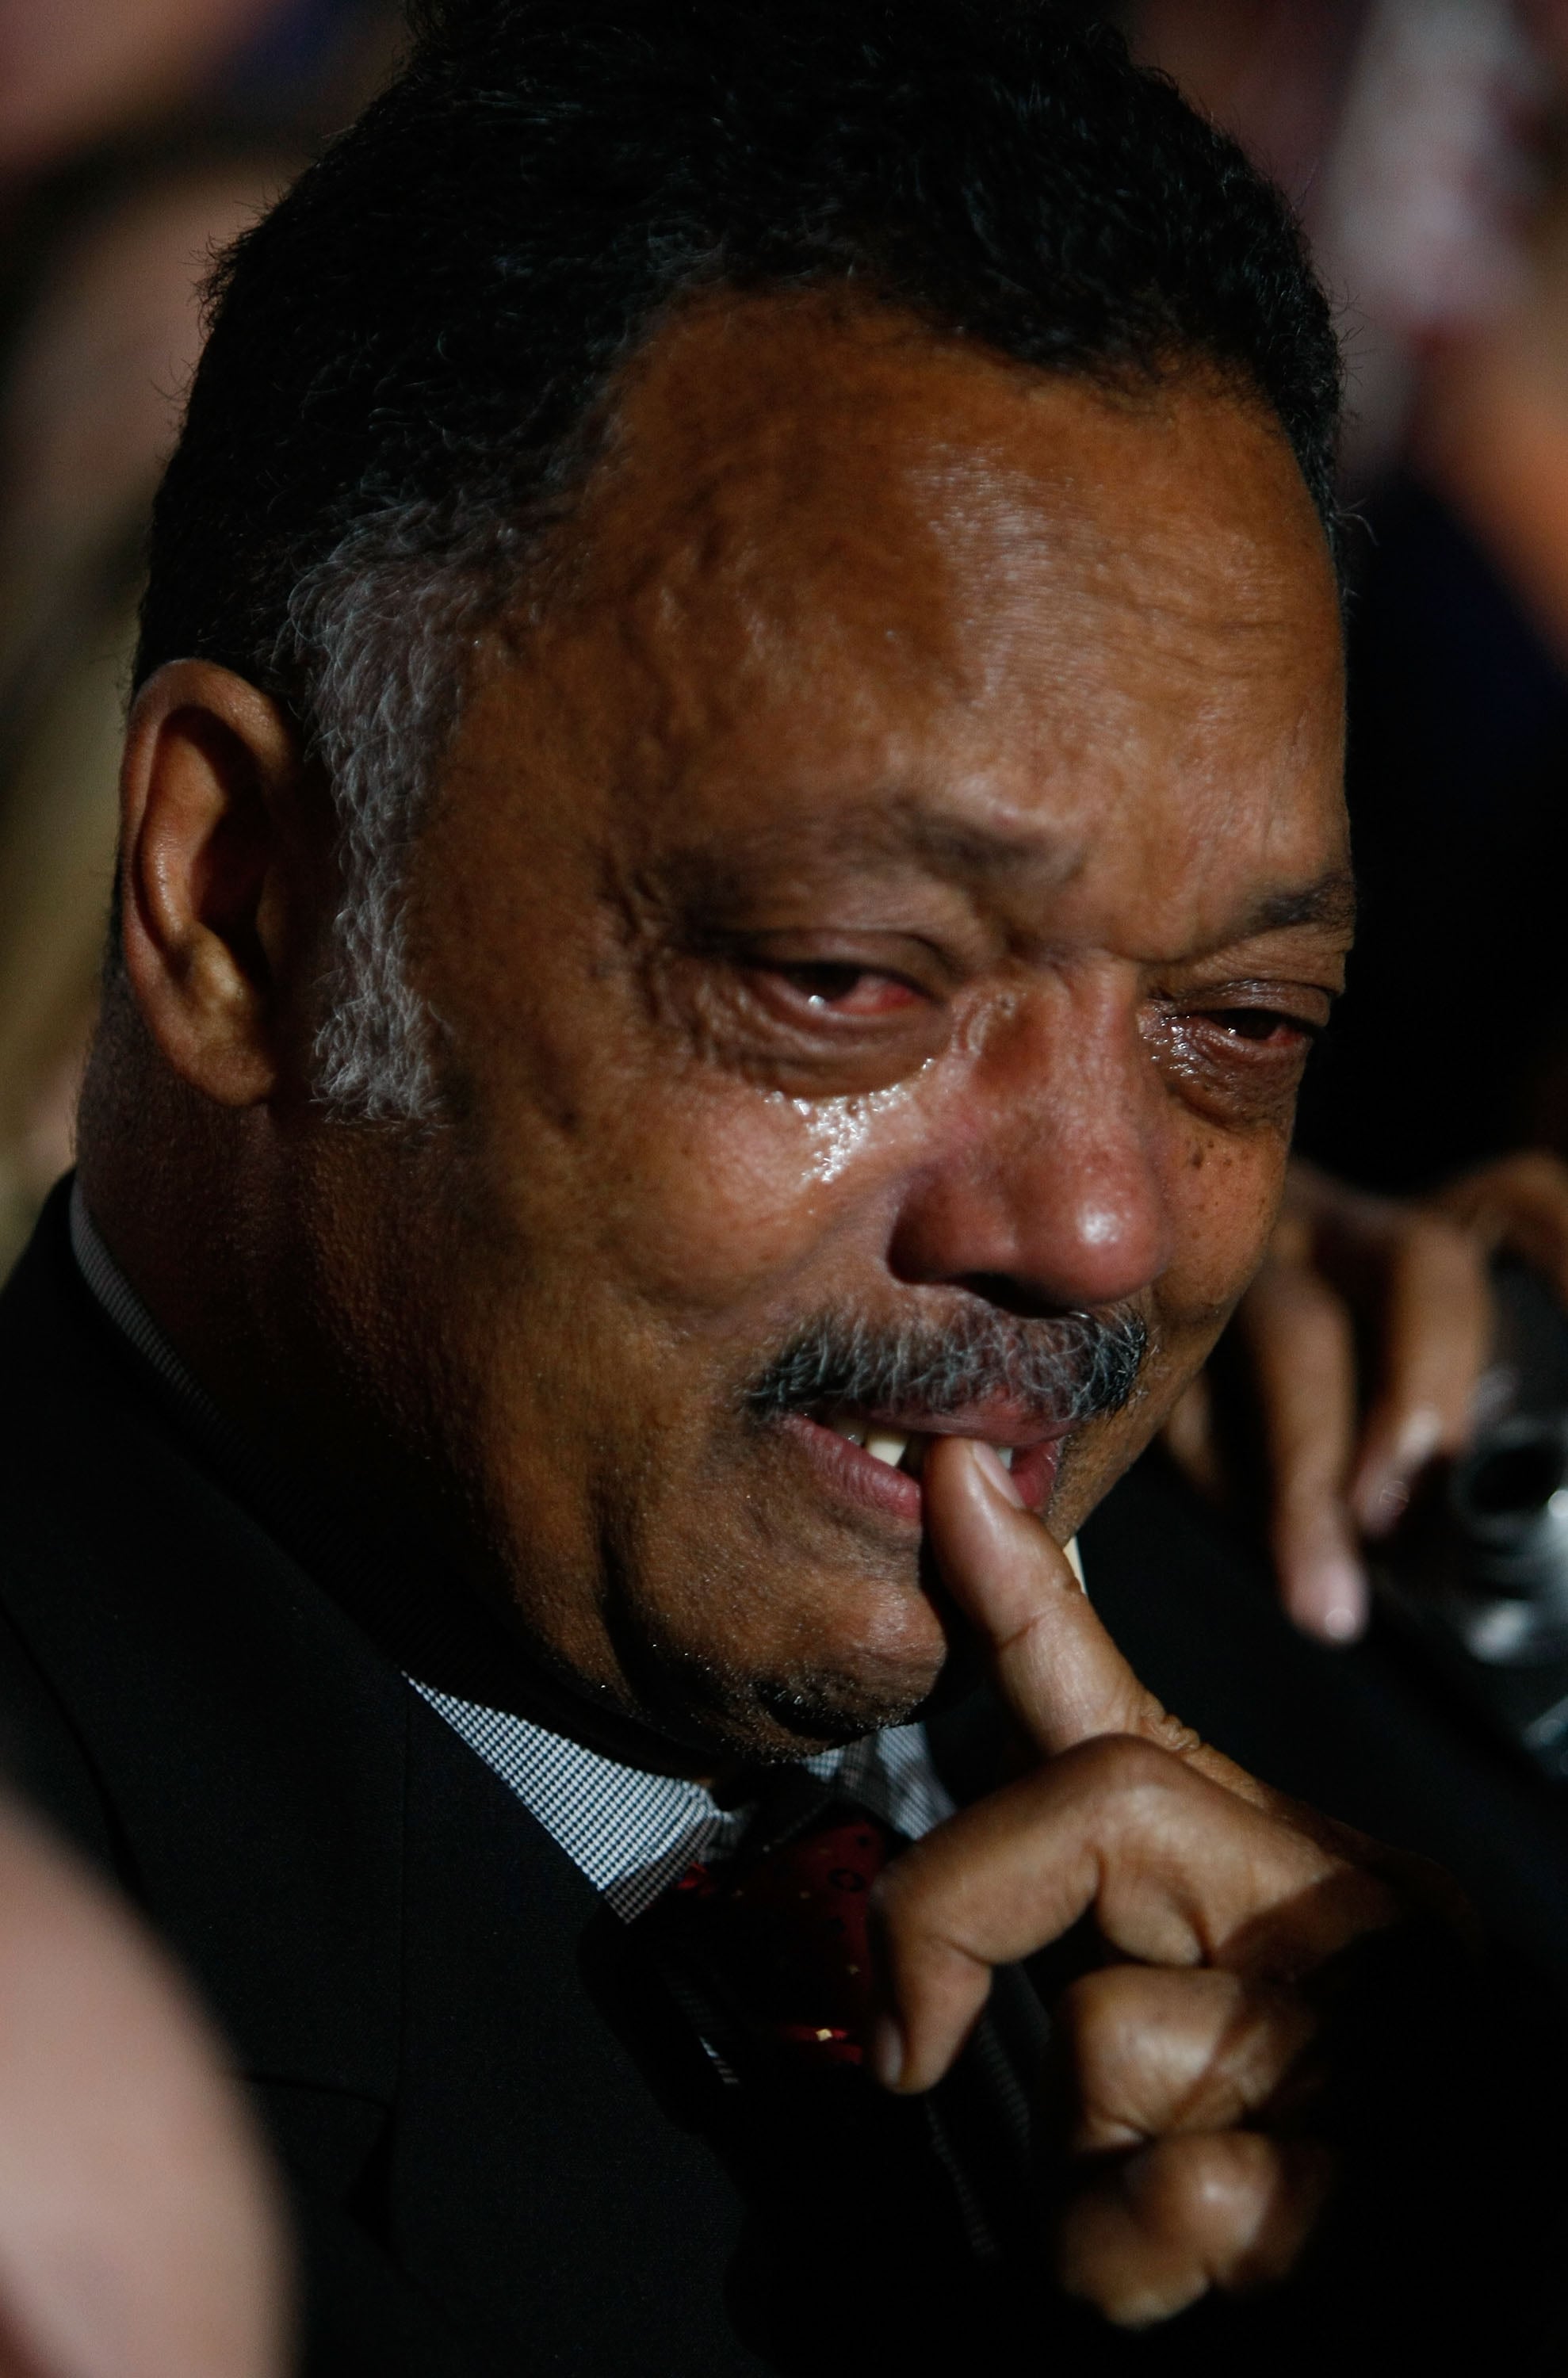 When-Jesse-Jackson-Couldnt-Contain-His-Emotions.jpg